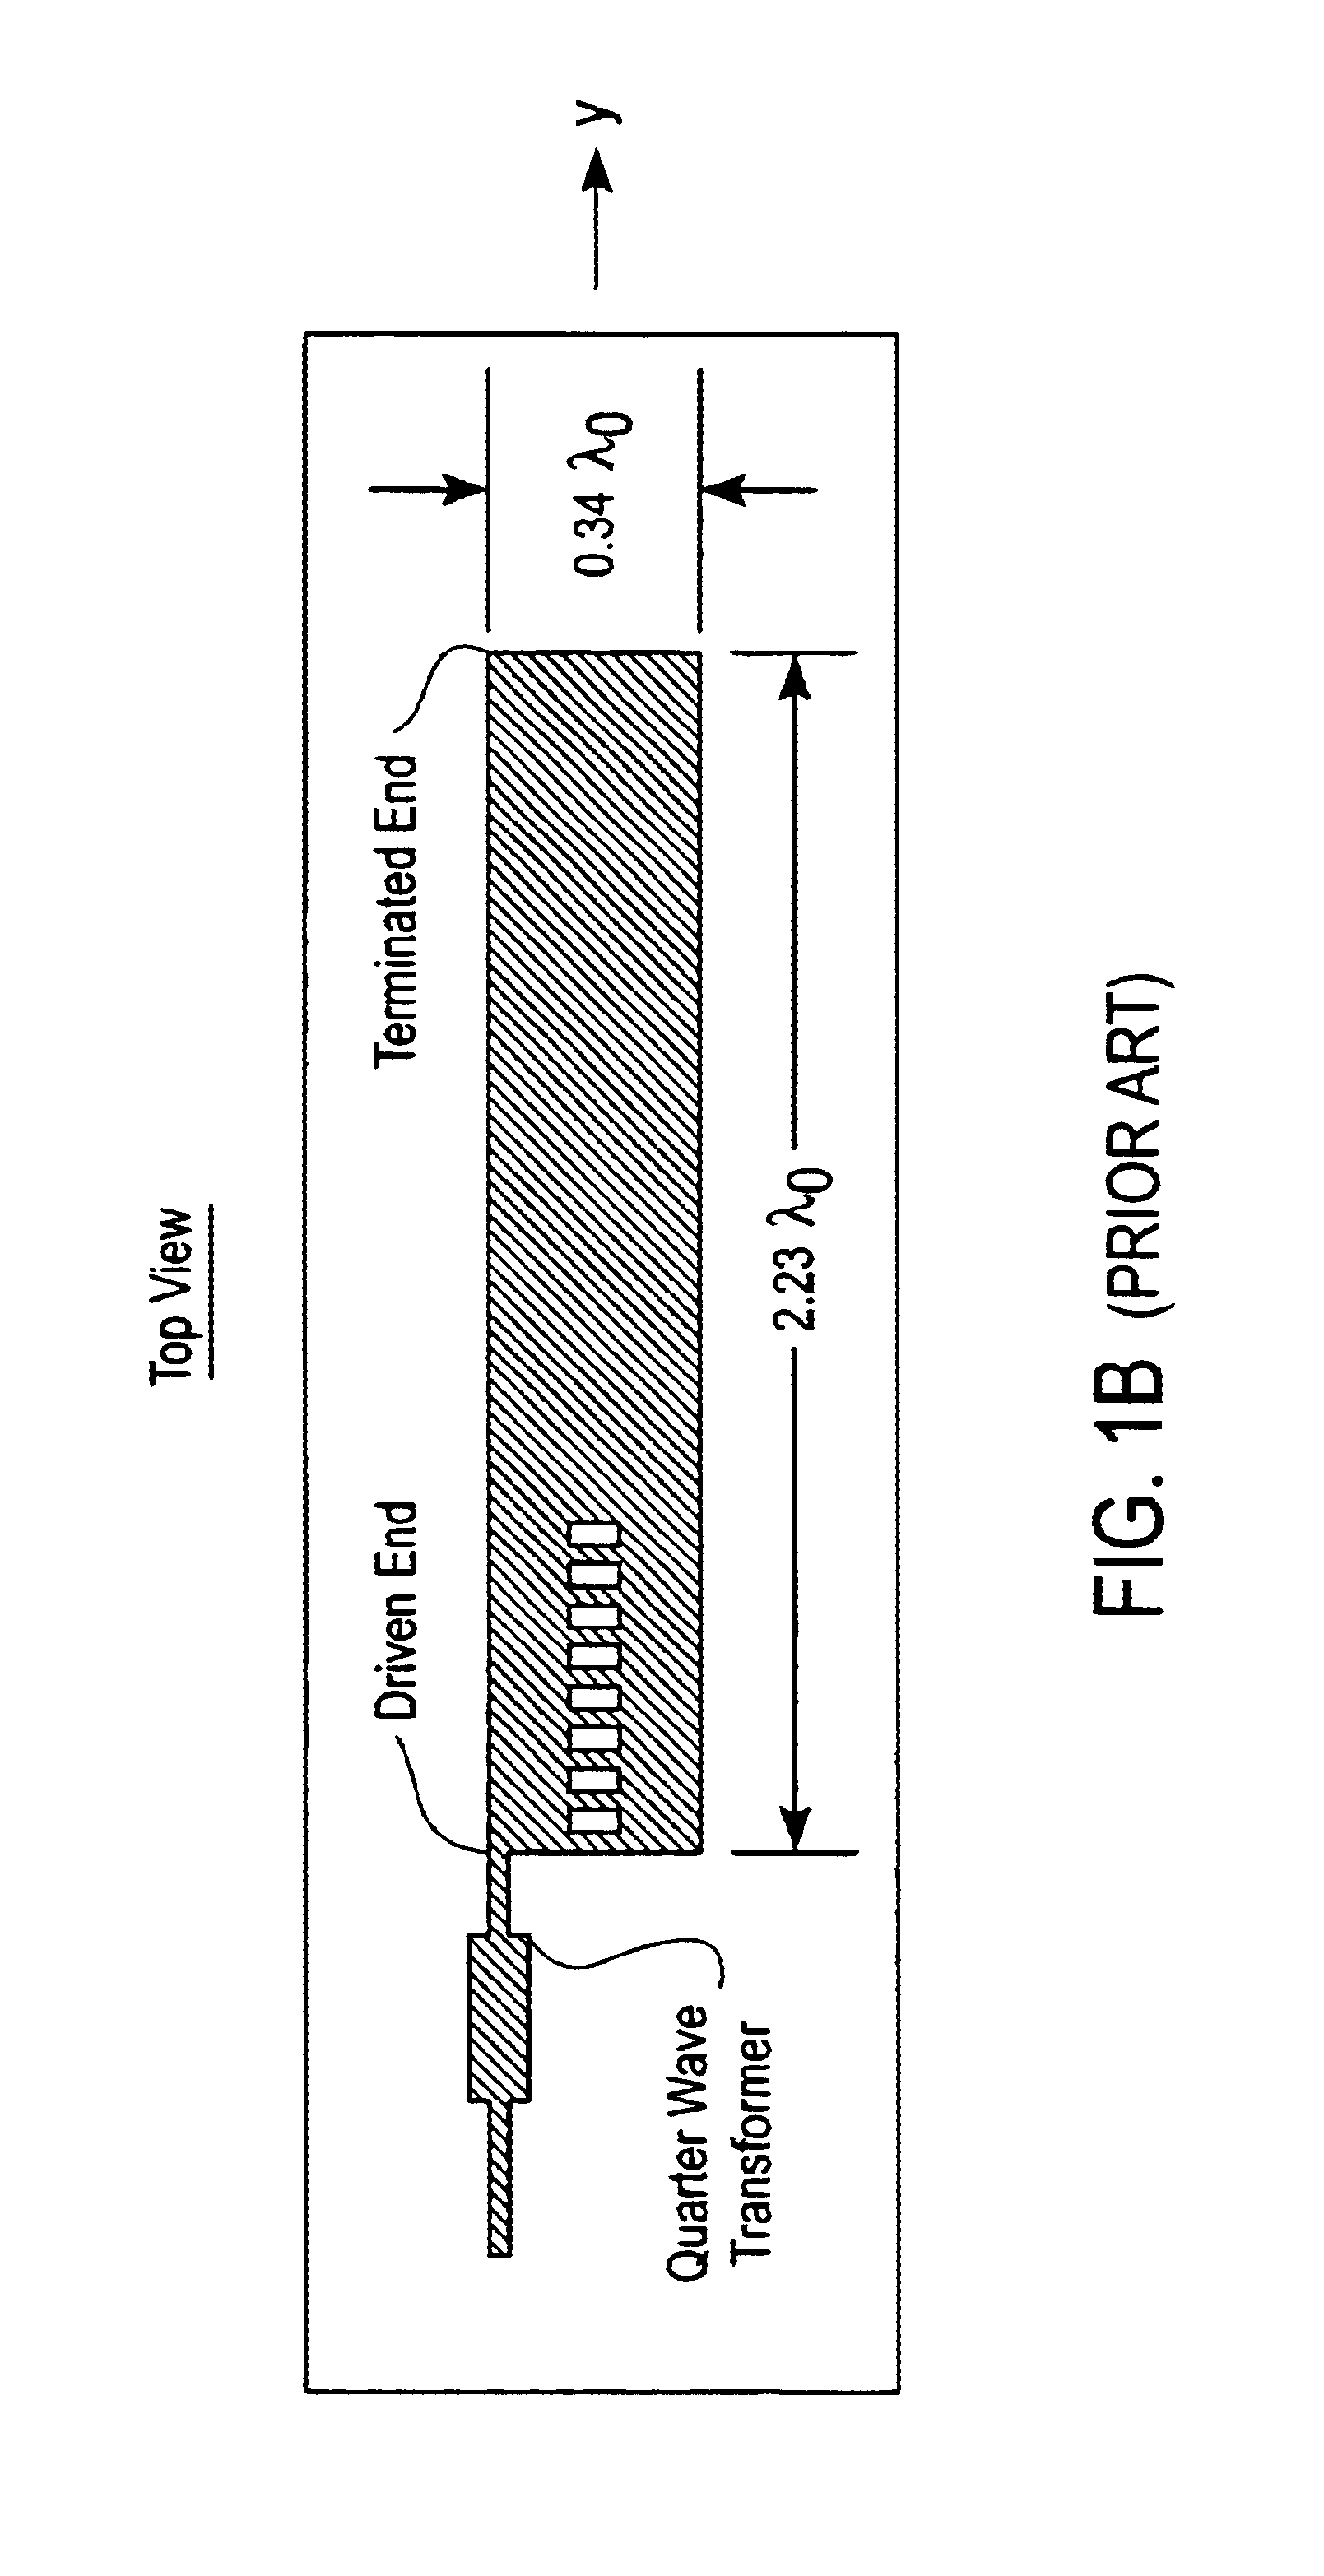 Leaky wave microstrip antenna with a prescribable pattern